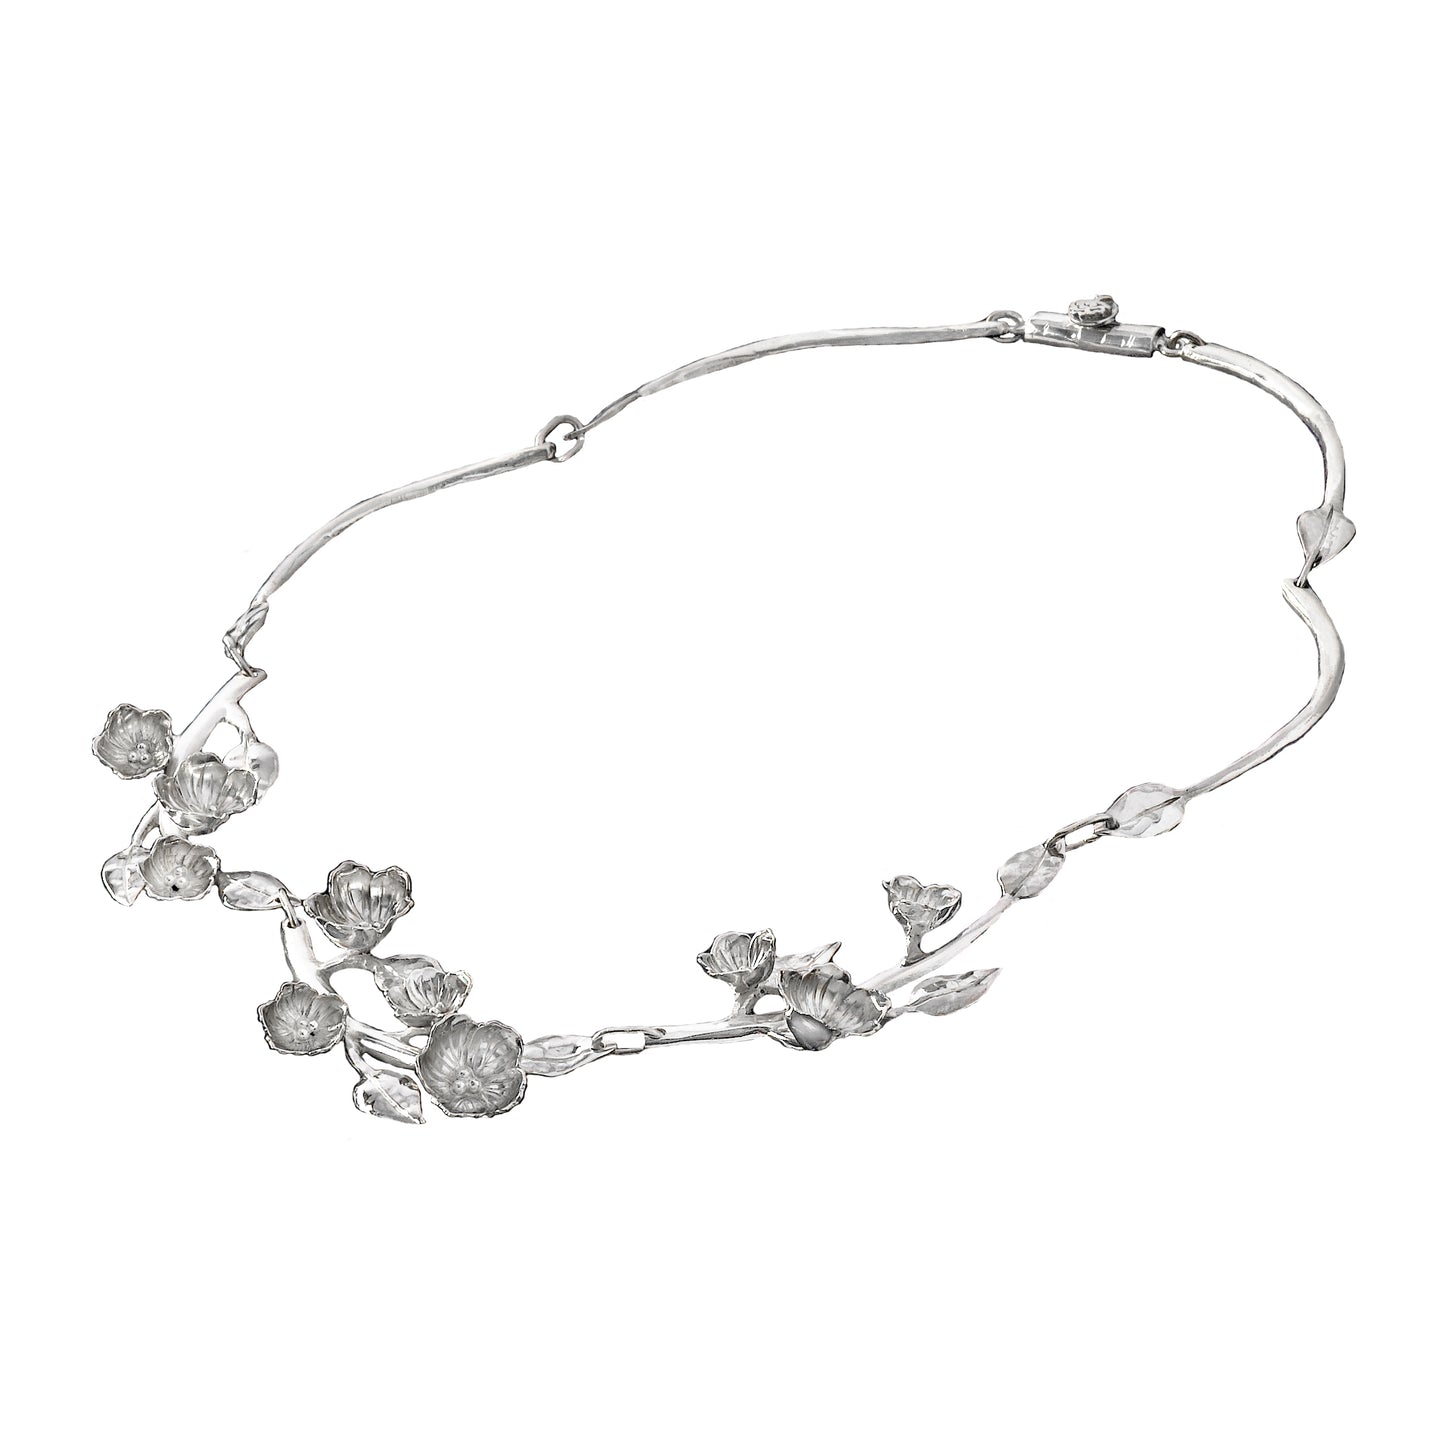 Cherry Blossom Full Branch Necklace